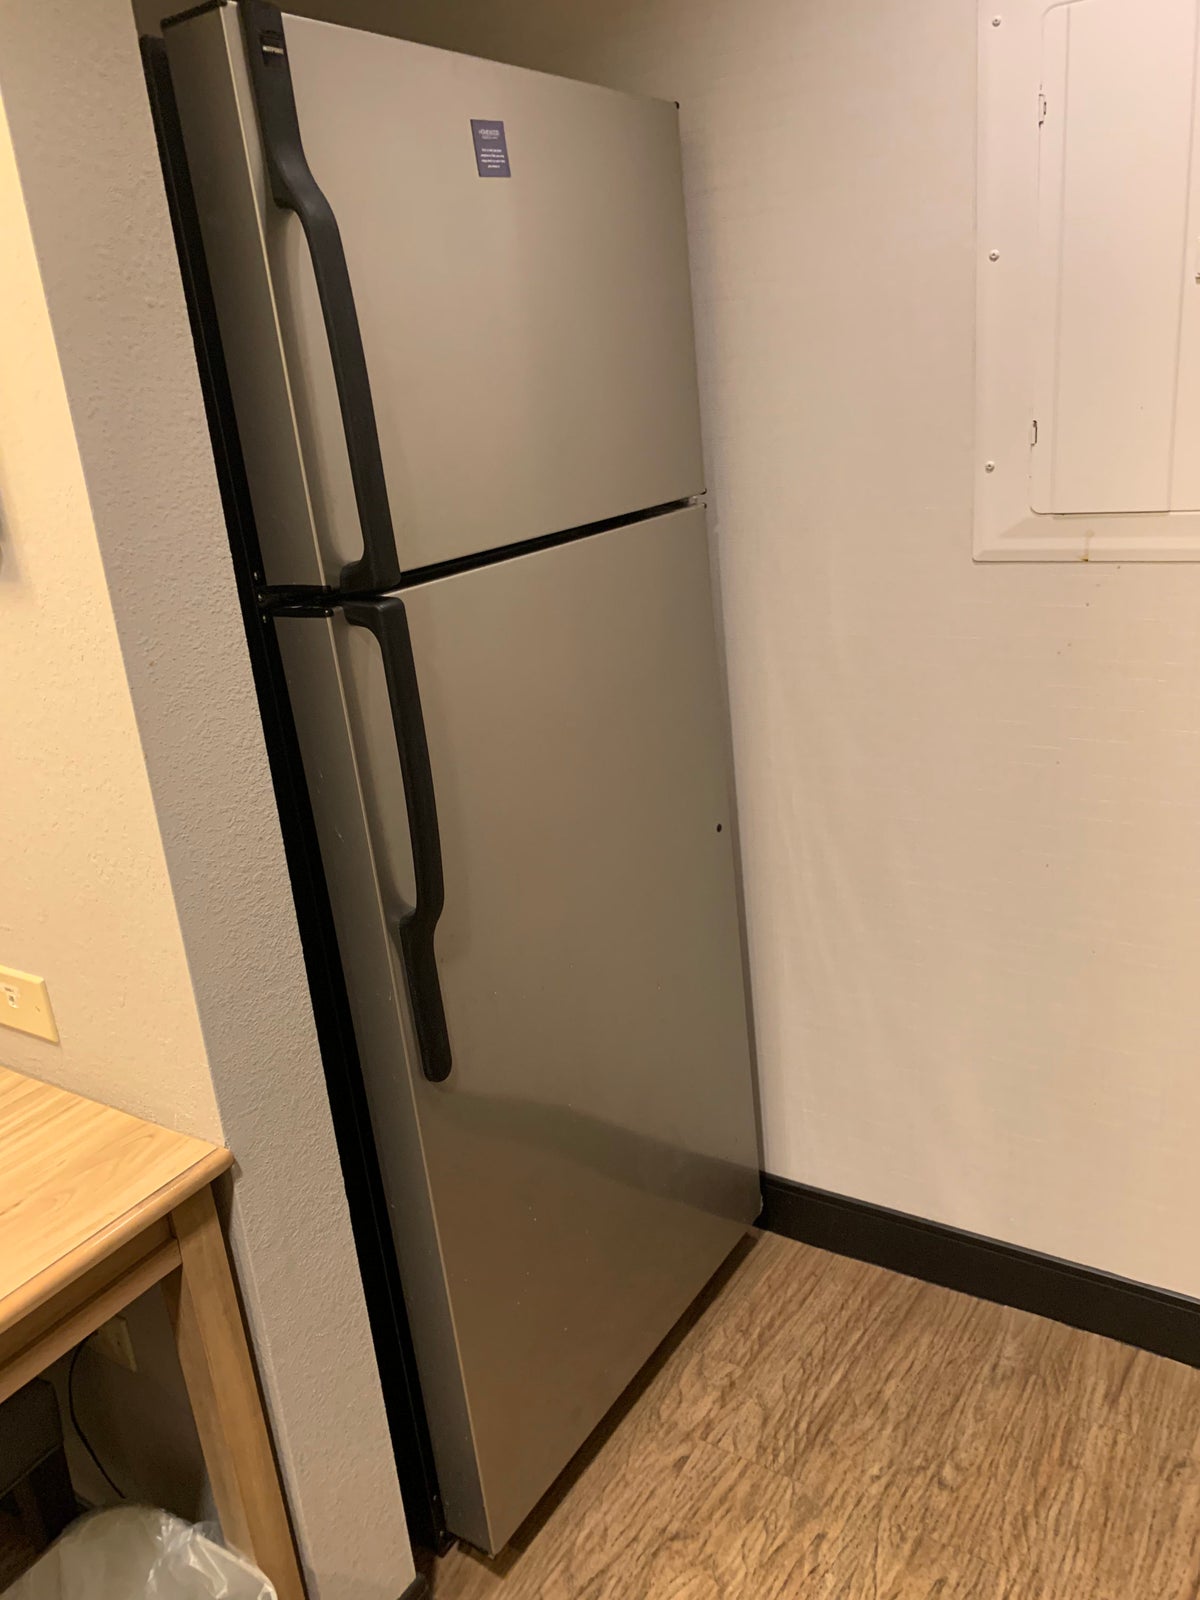 Refrigerator in the guestroom at Homewood Suites Austin Round Rock 